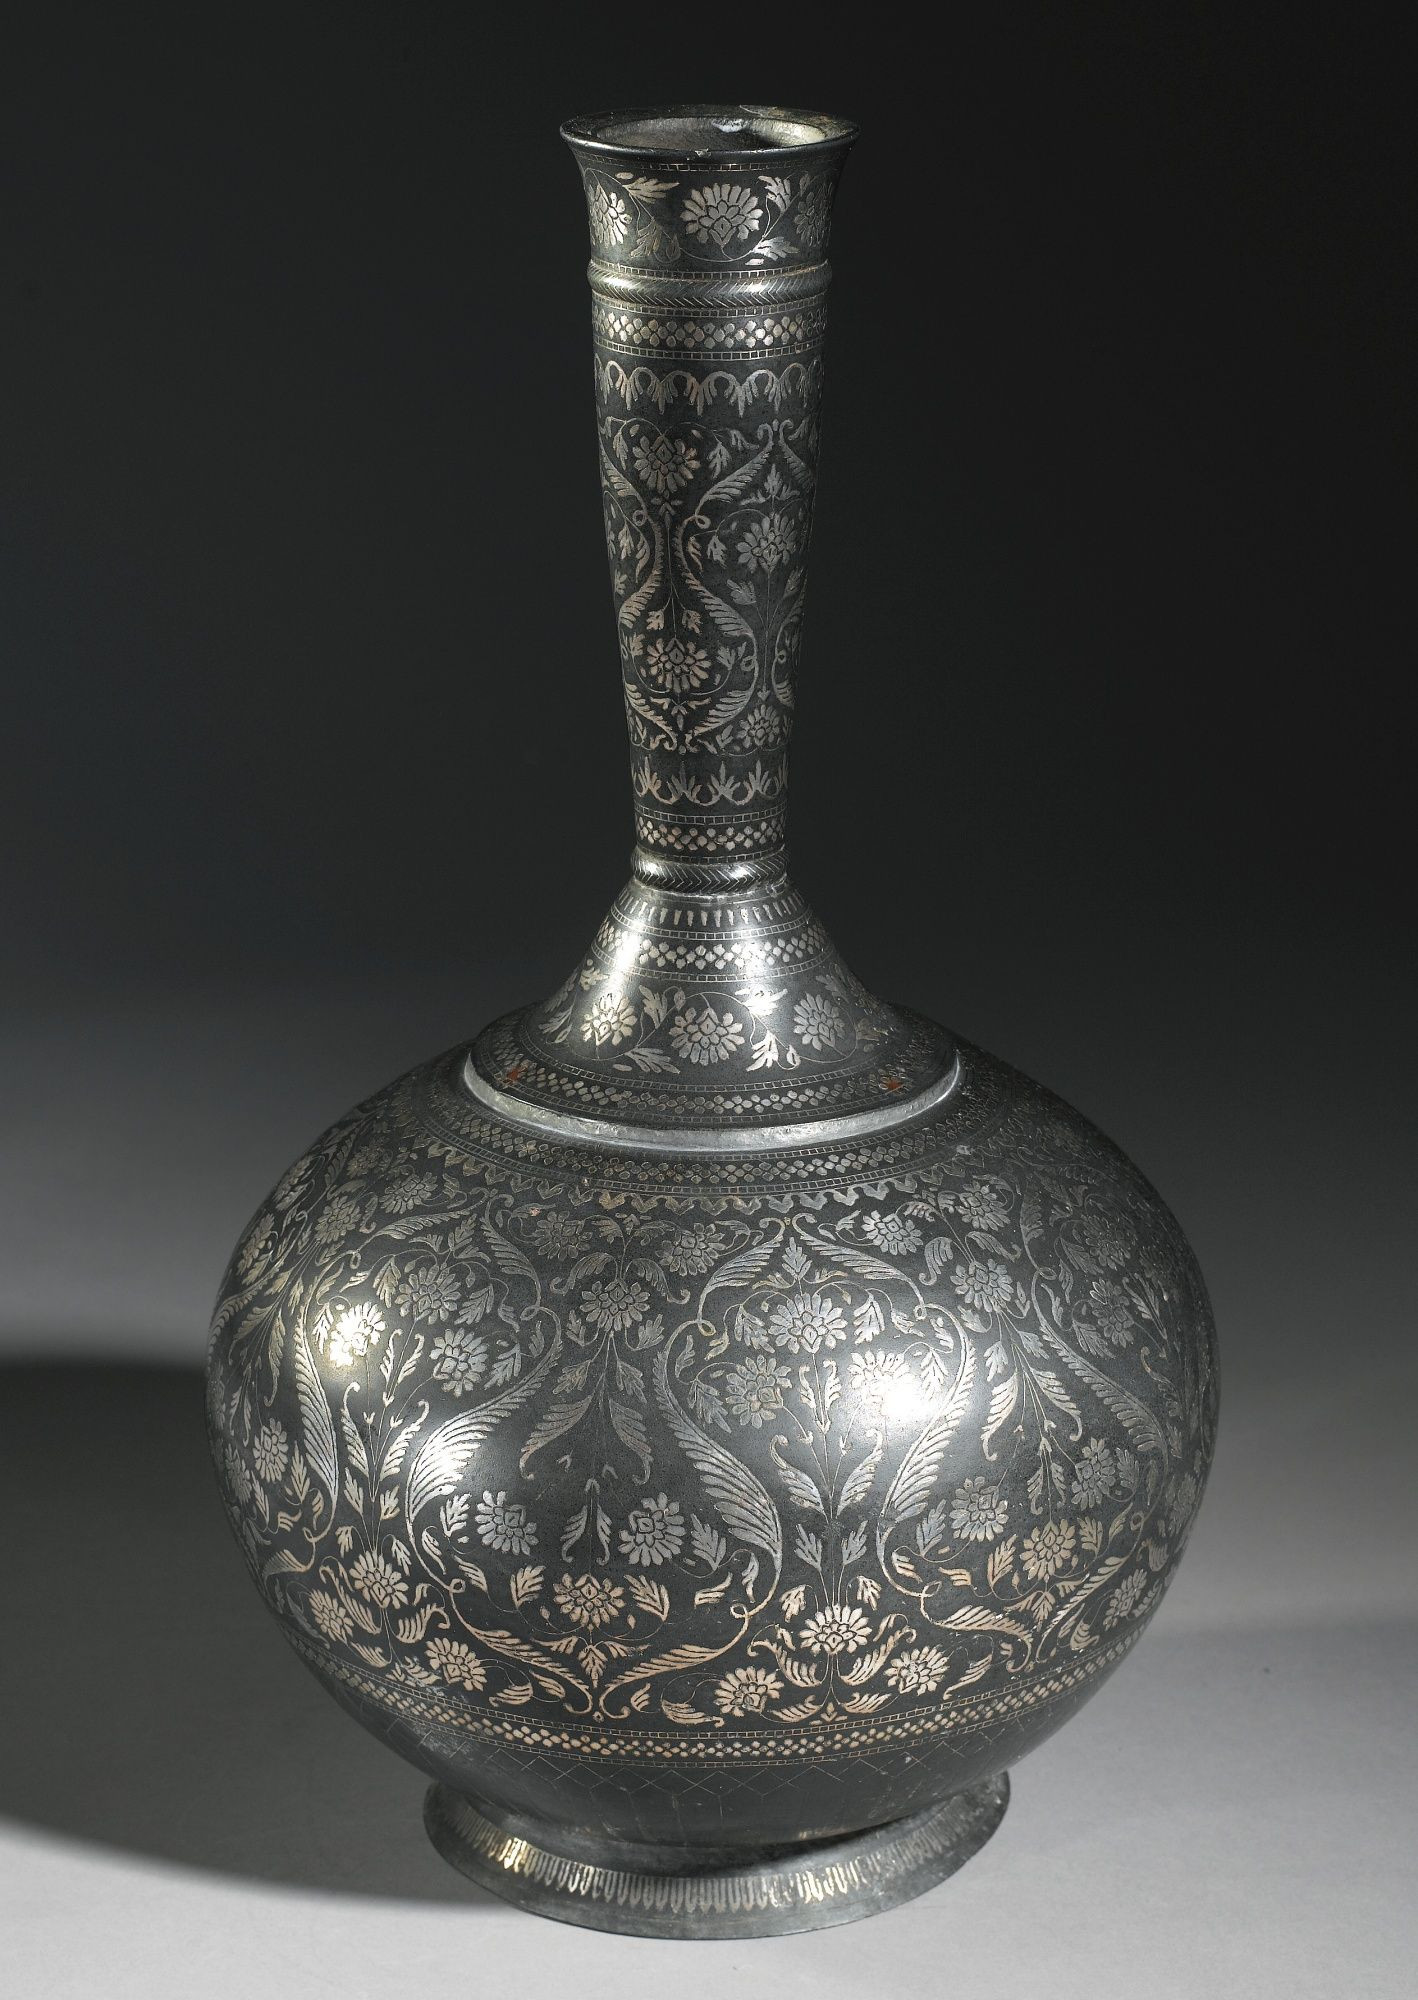 tall thin vase cheap of a monumental bidriware bottle vase india 19th century the globular pertaining to a monumental bidriware bottle vase india 19th century the globular body on a thin everted foot with a tall slender neck widening towards the mouth